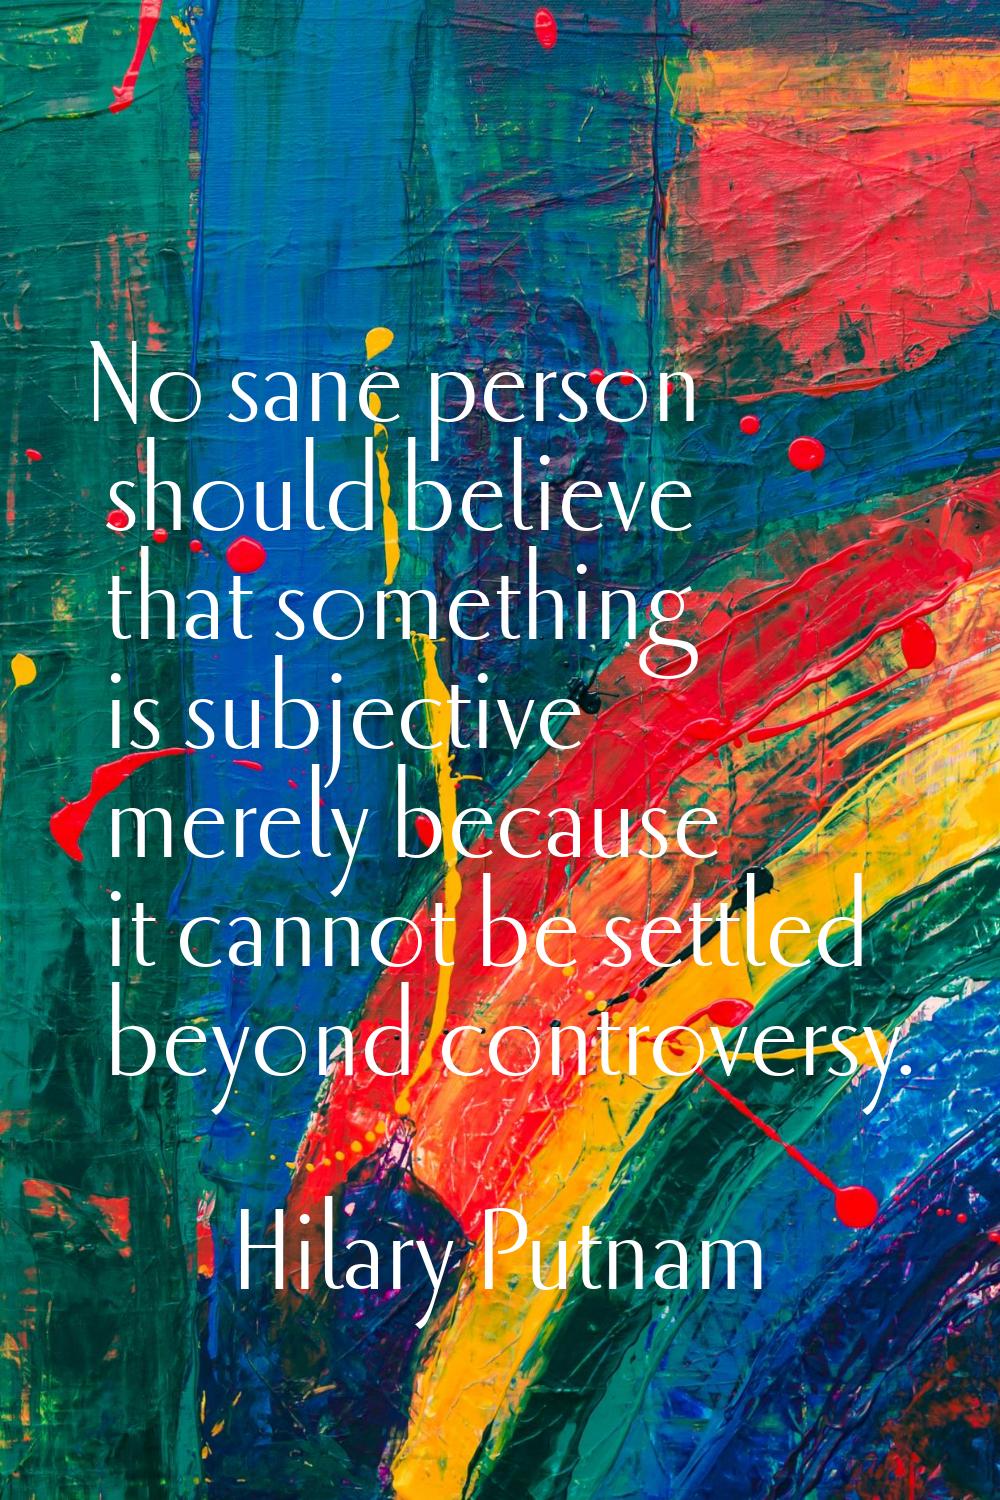 No sane person should believe that something is subjective merely because it cannot be settled beyo